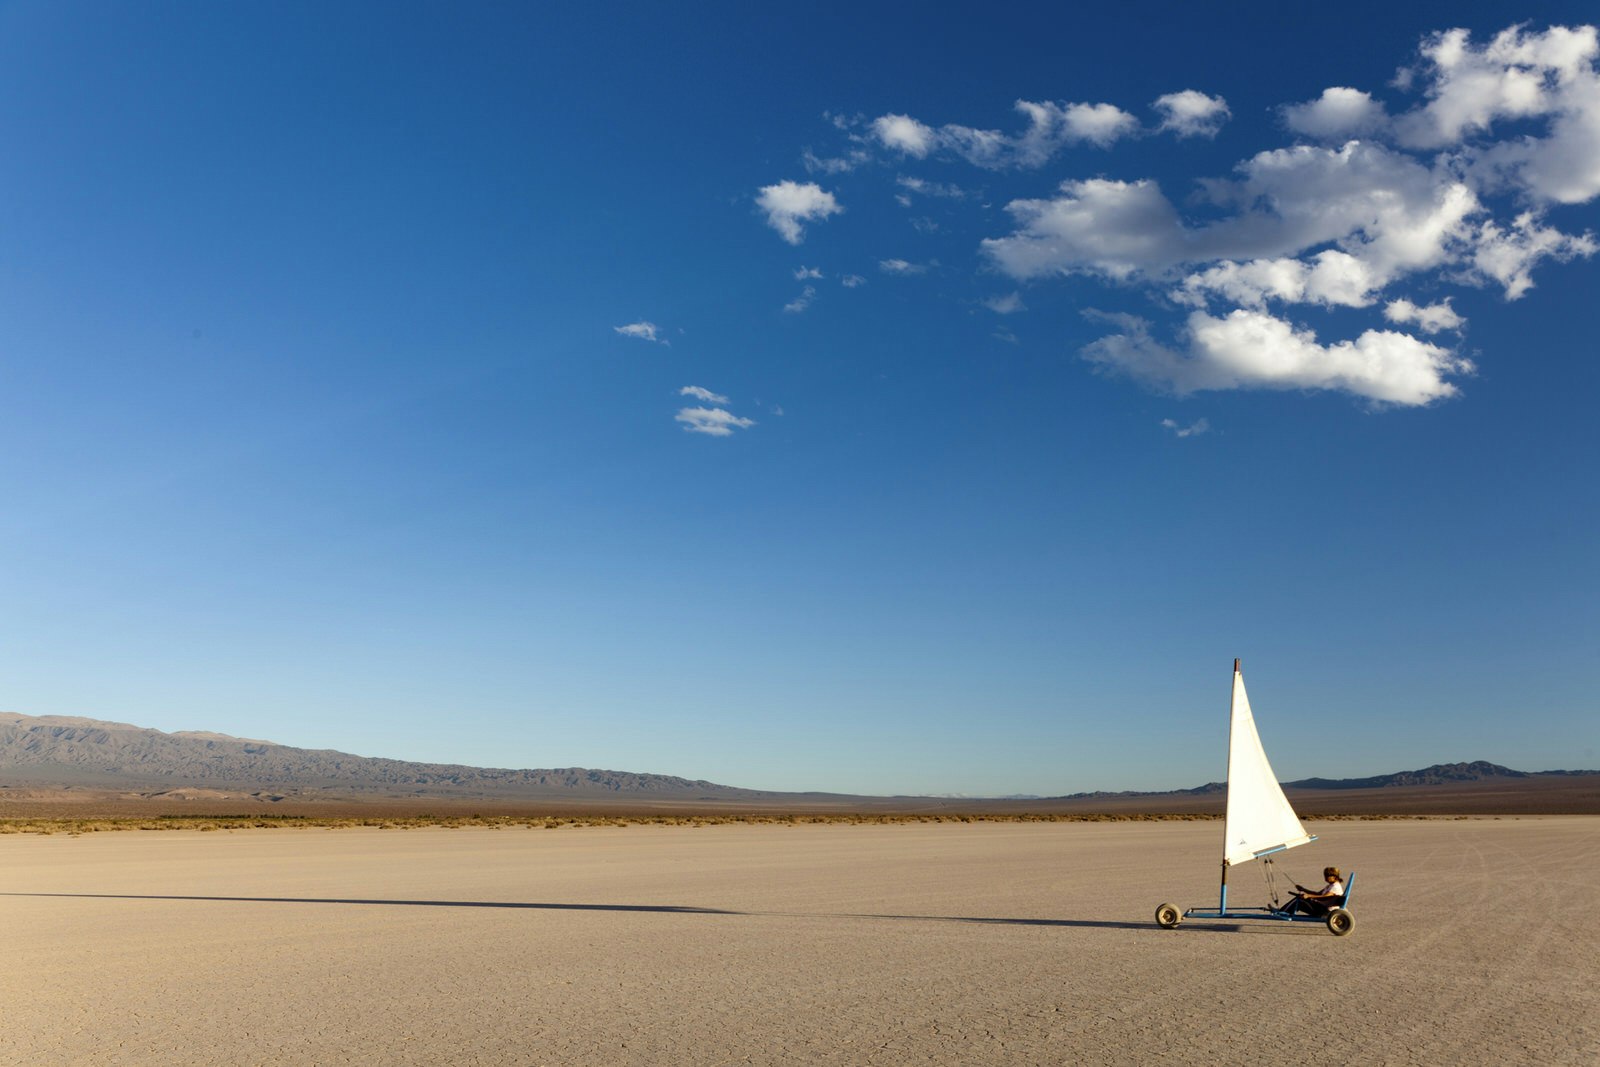 A person land sails across an empty lakebed, with blue skies above.